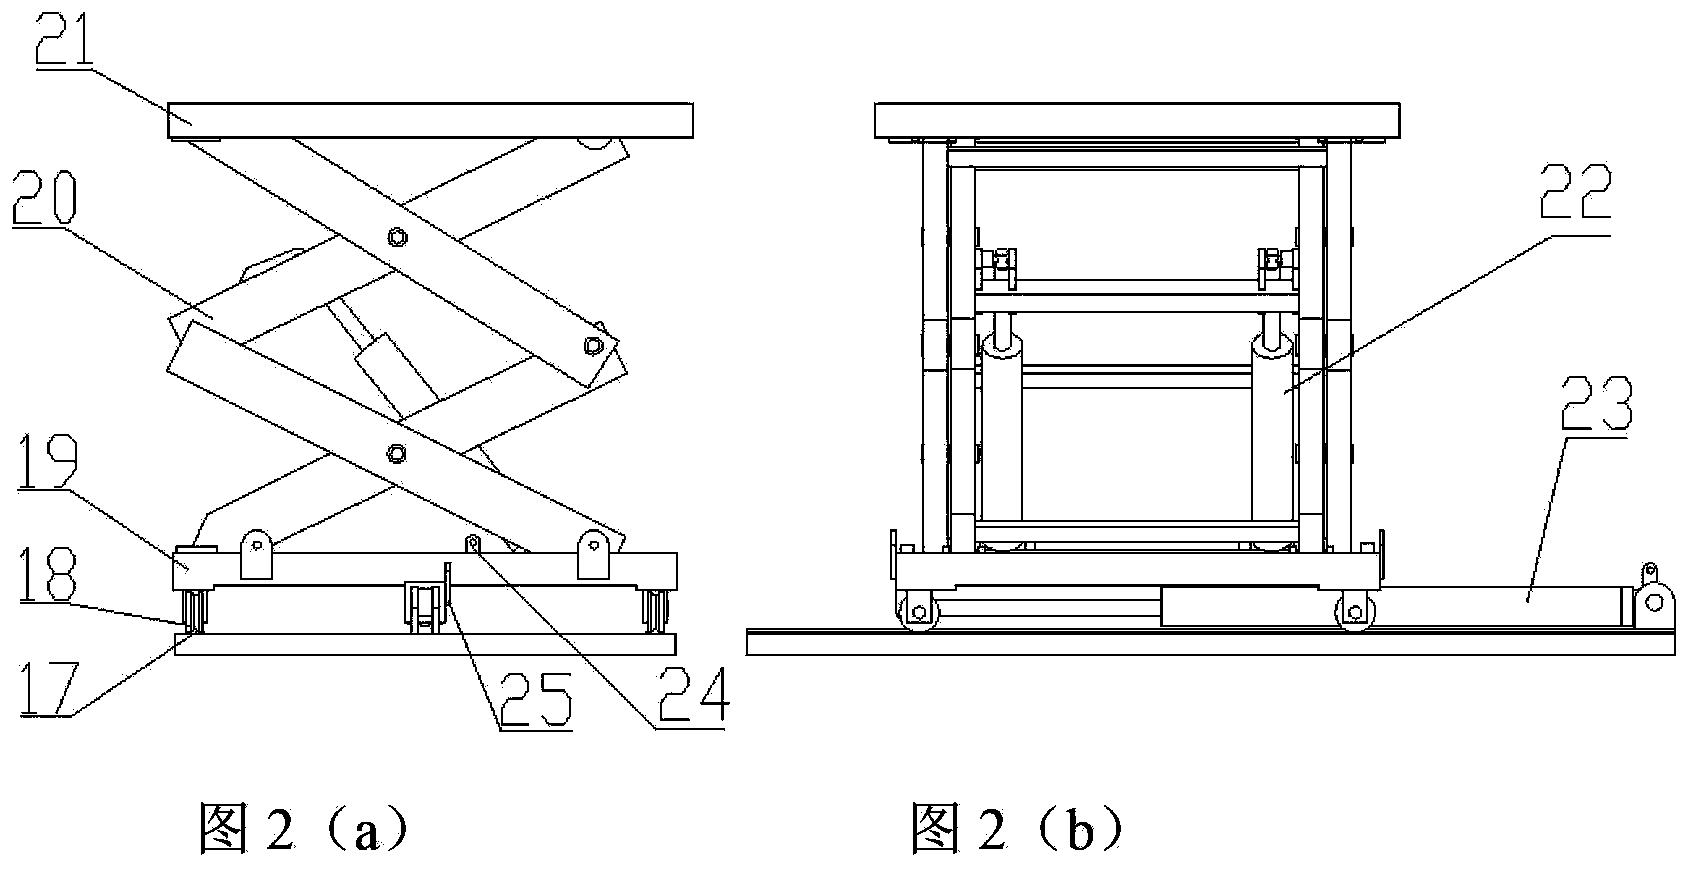 System for realizing PVC flooring inspecting and conveying, and stacker blanking